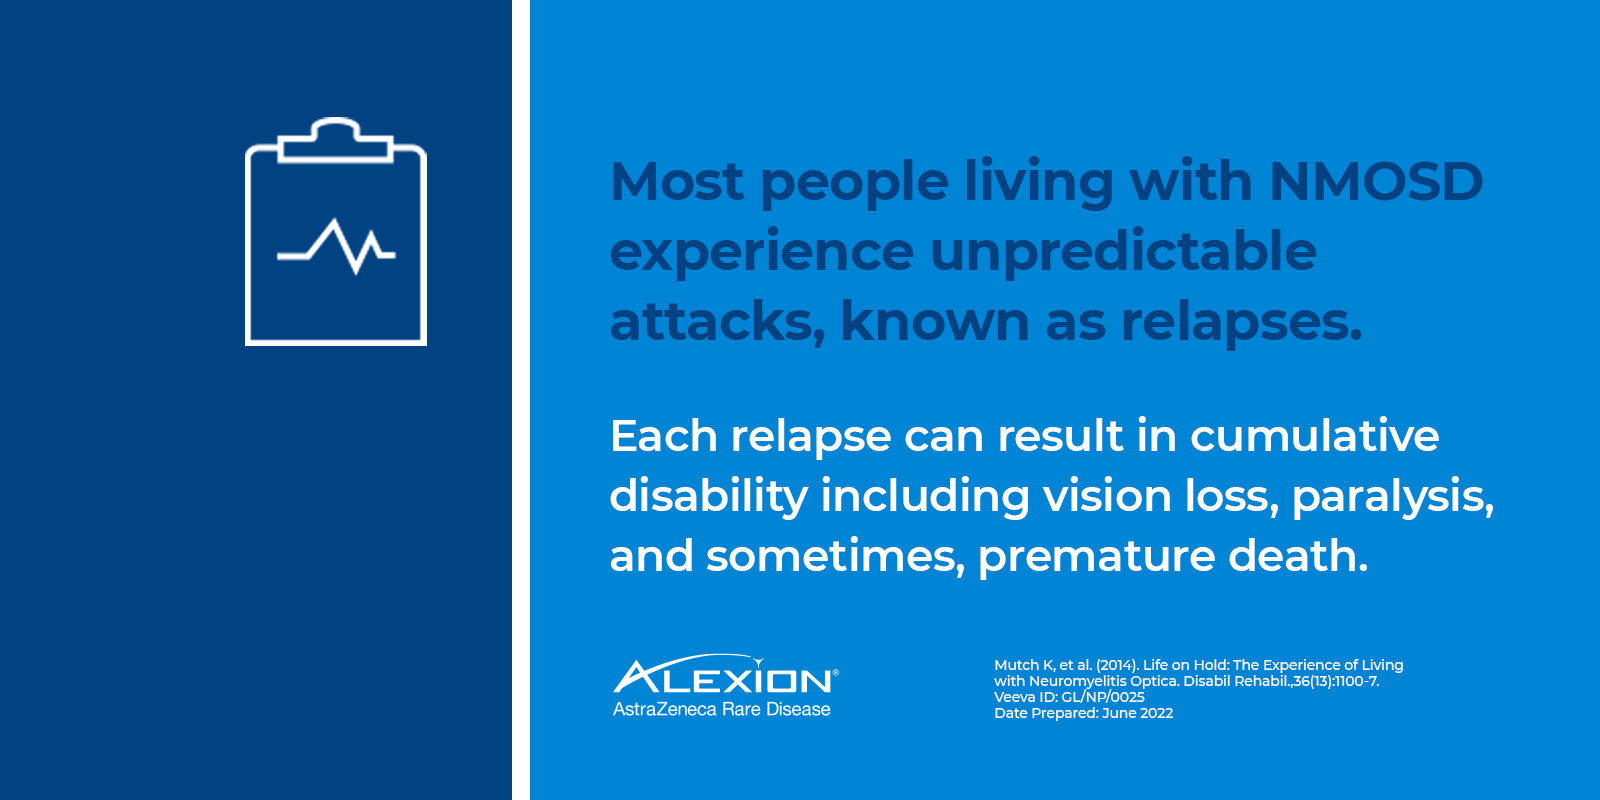 Text: most people living with NMOSD experience unpredictable attacks, known as relapses. Each relapse can result in cumulative disability including vision loss, paralysis, and sometimes premature death